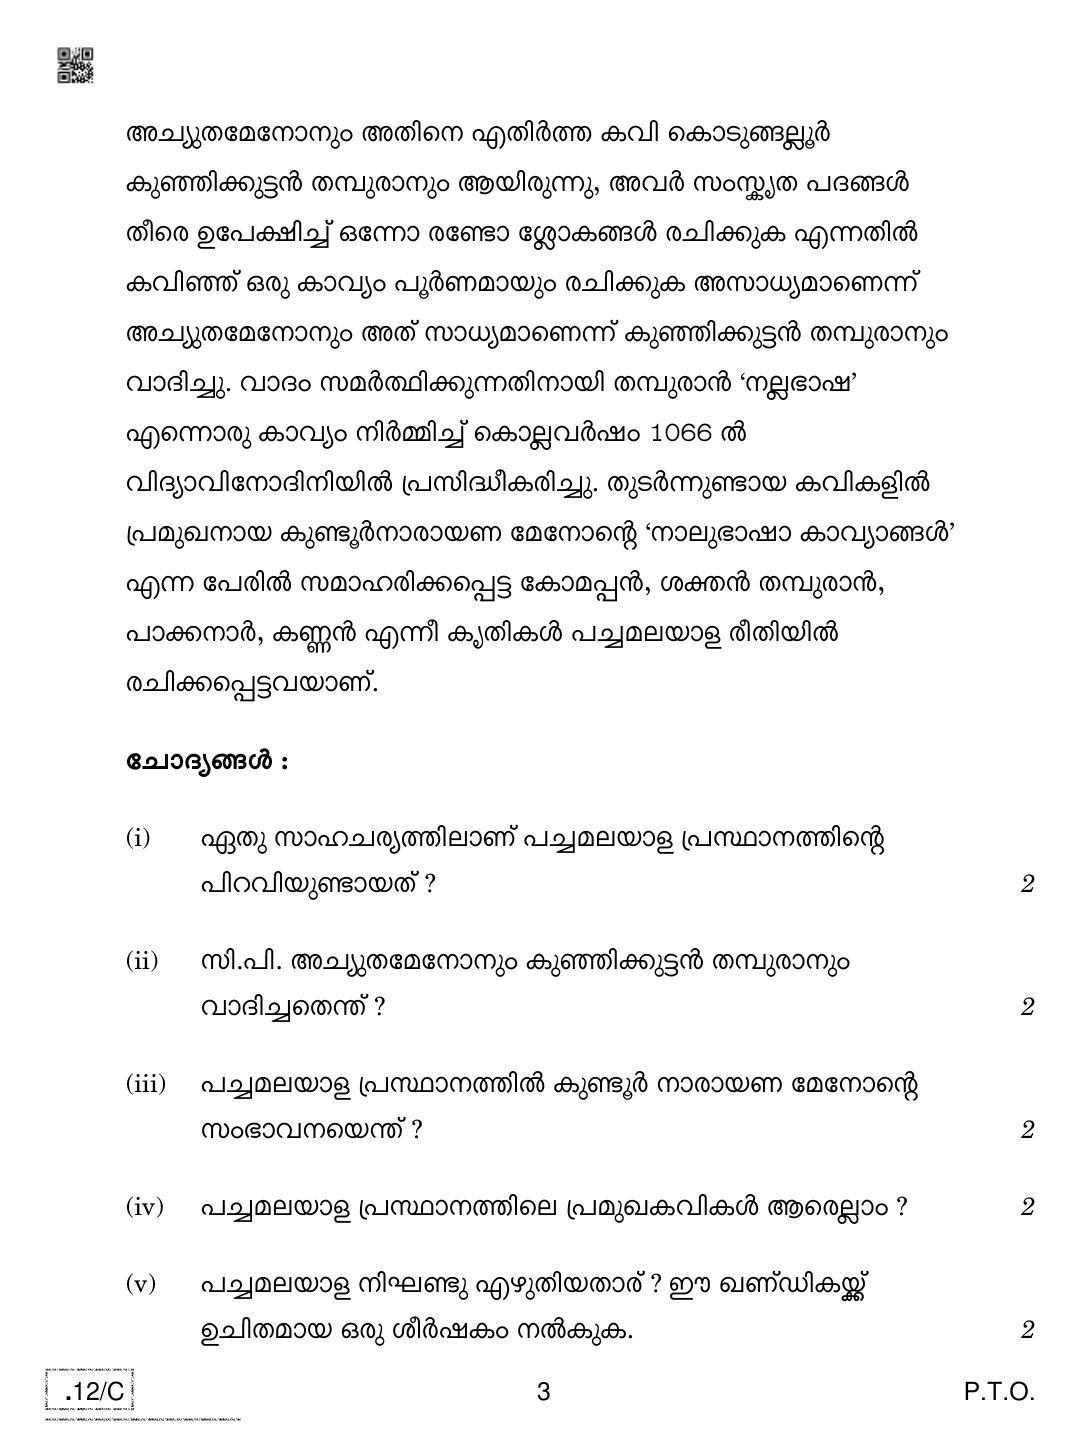 CBSE Class 10 Malayalam 2020 Compartment Question Paper - Page 3